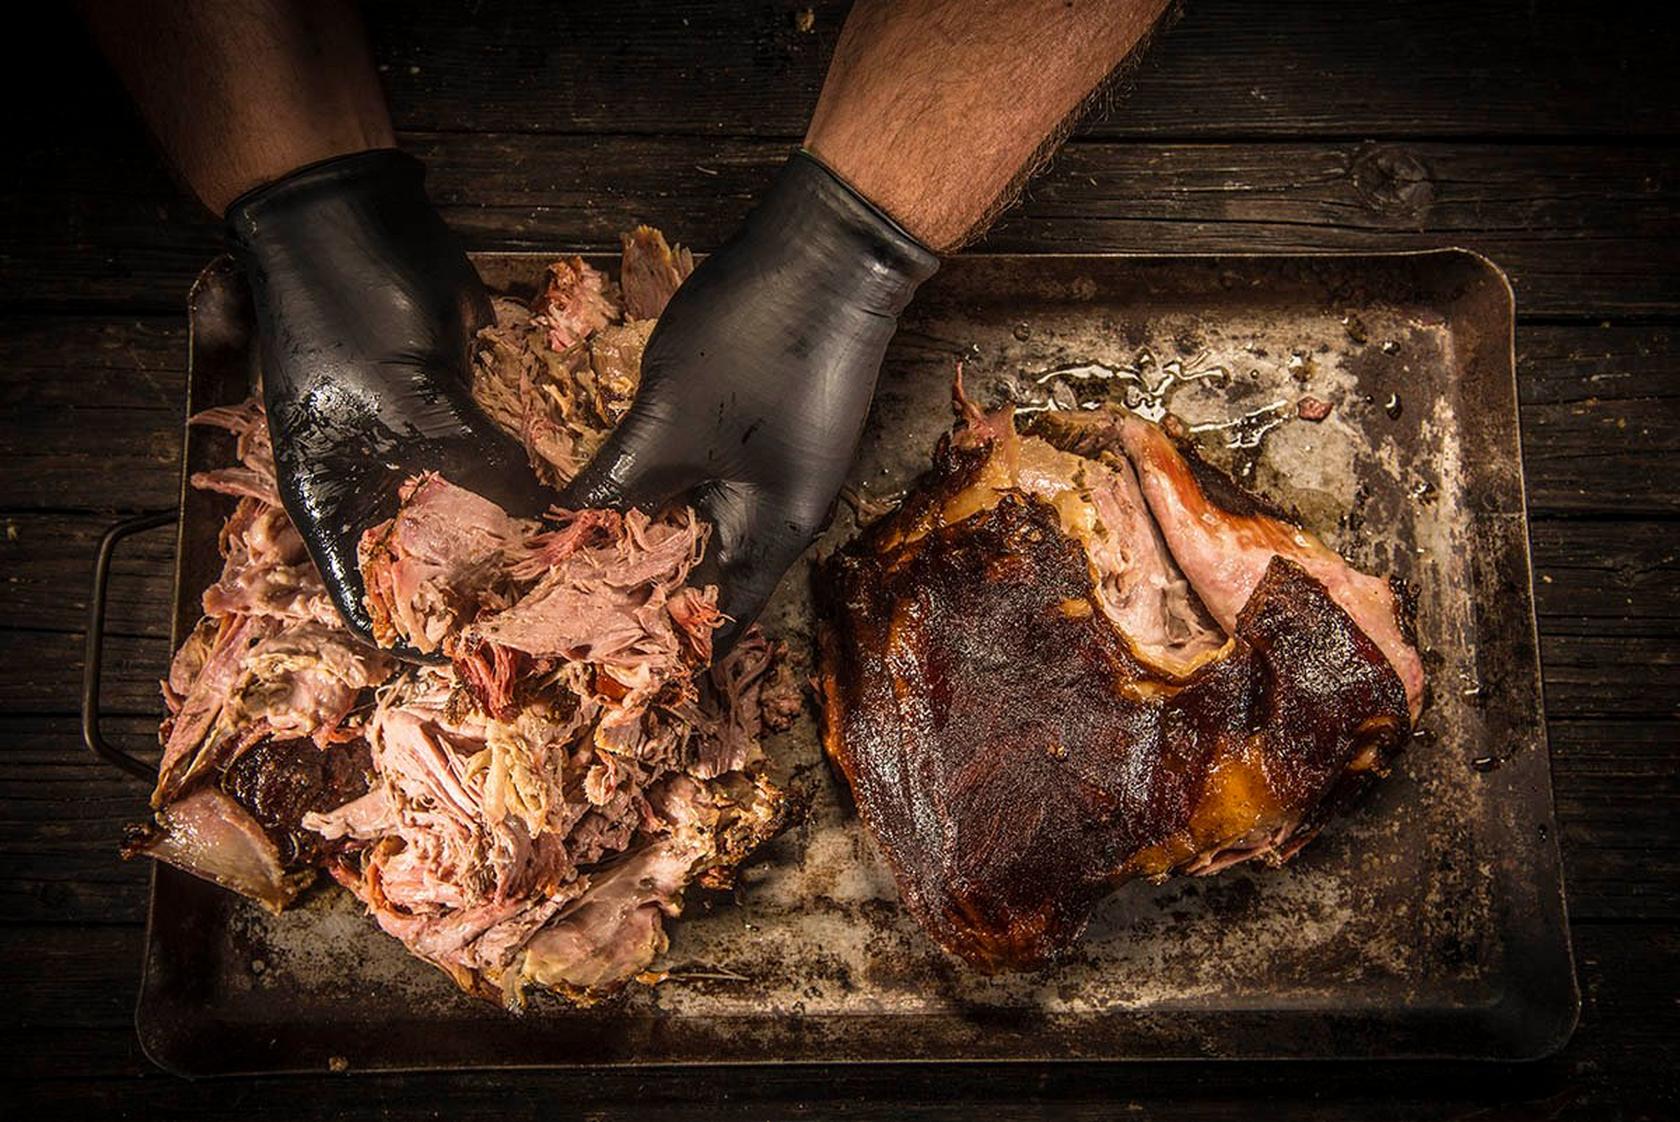 How To Make Pulled Pork From Smoked Pork Butt